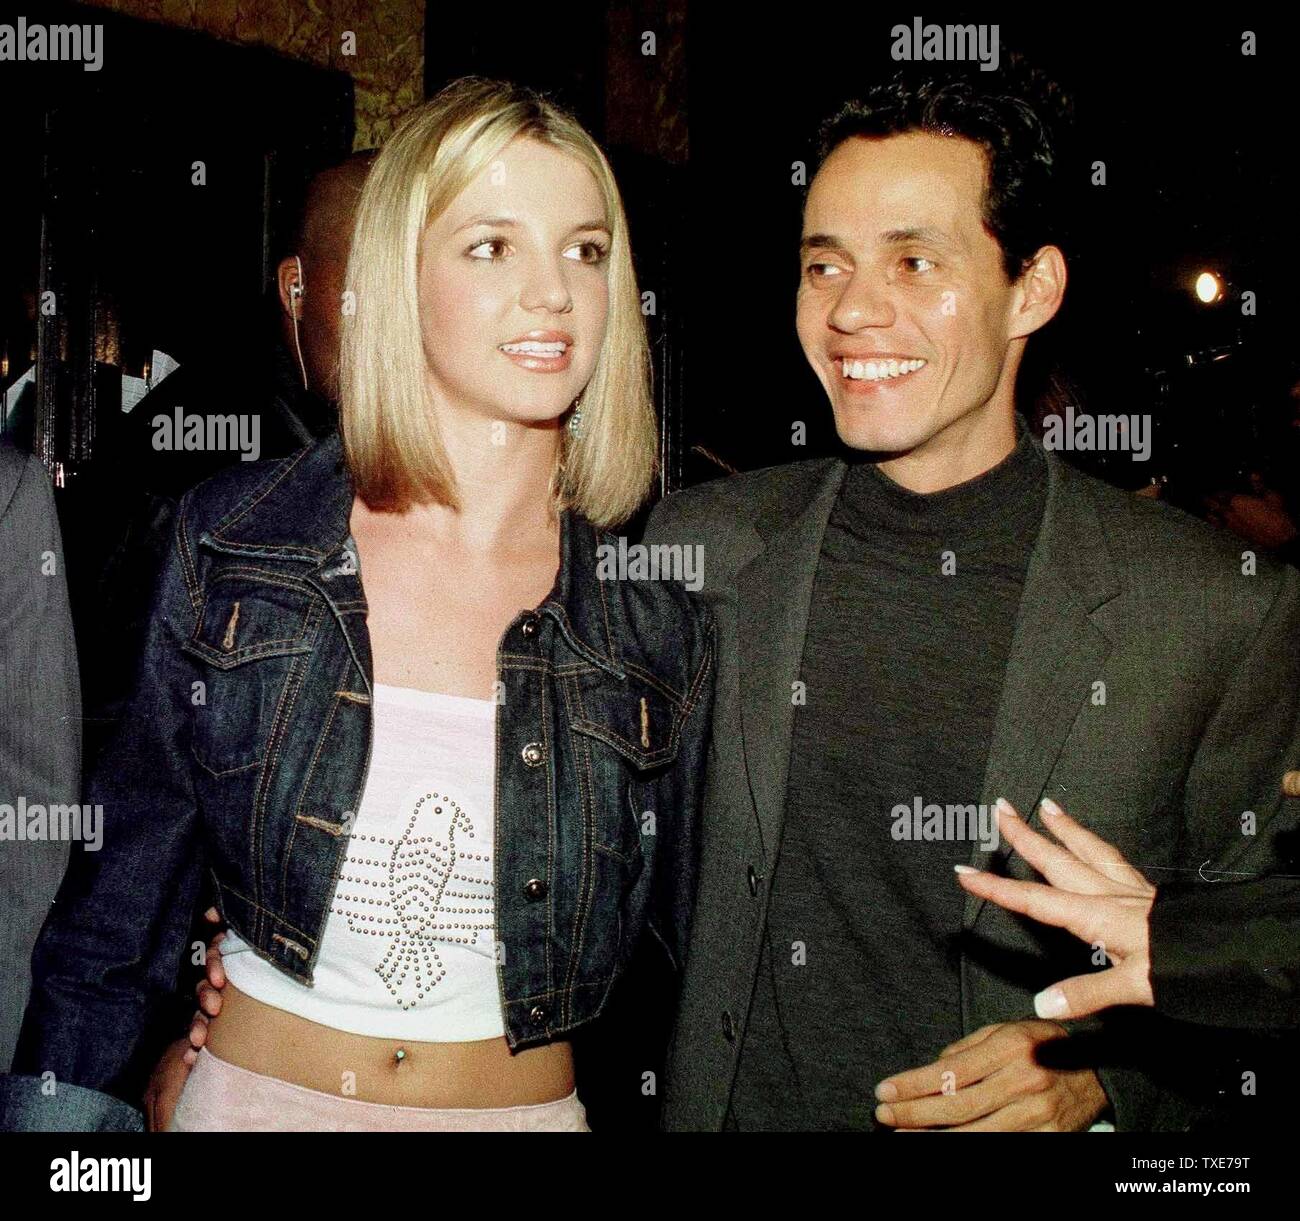 NYP2000010402 - 04 JANUARY 2000 - NEW YORK, NEW YORK, USA: A fan reaches out to Grammy Award nominees Britney Spears and Marc Anthony, January 4 , after the Grammy Awards announcements in New York.   rg/ep/Ezio Petersen  UPI Stock Photo